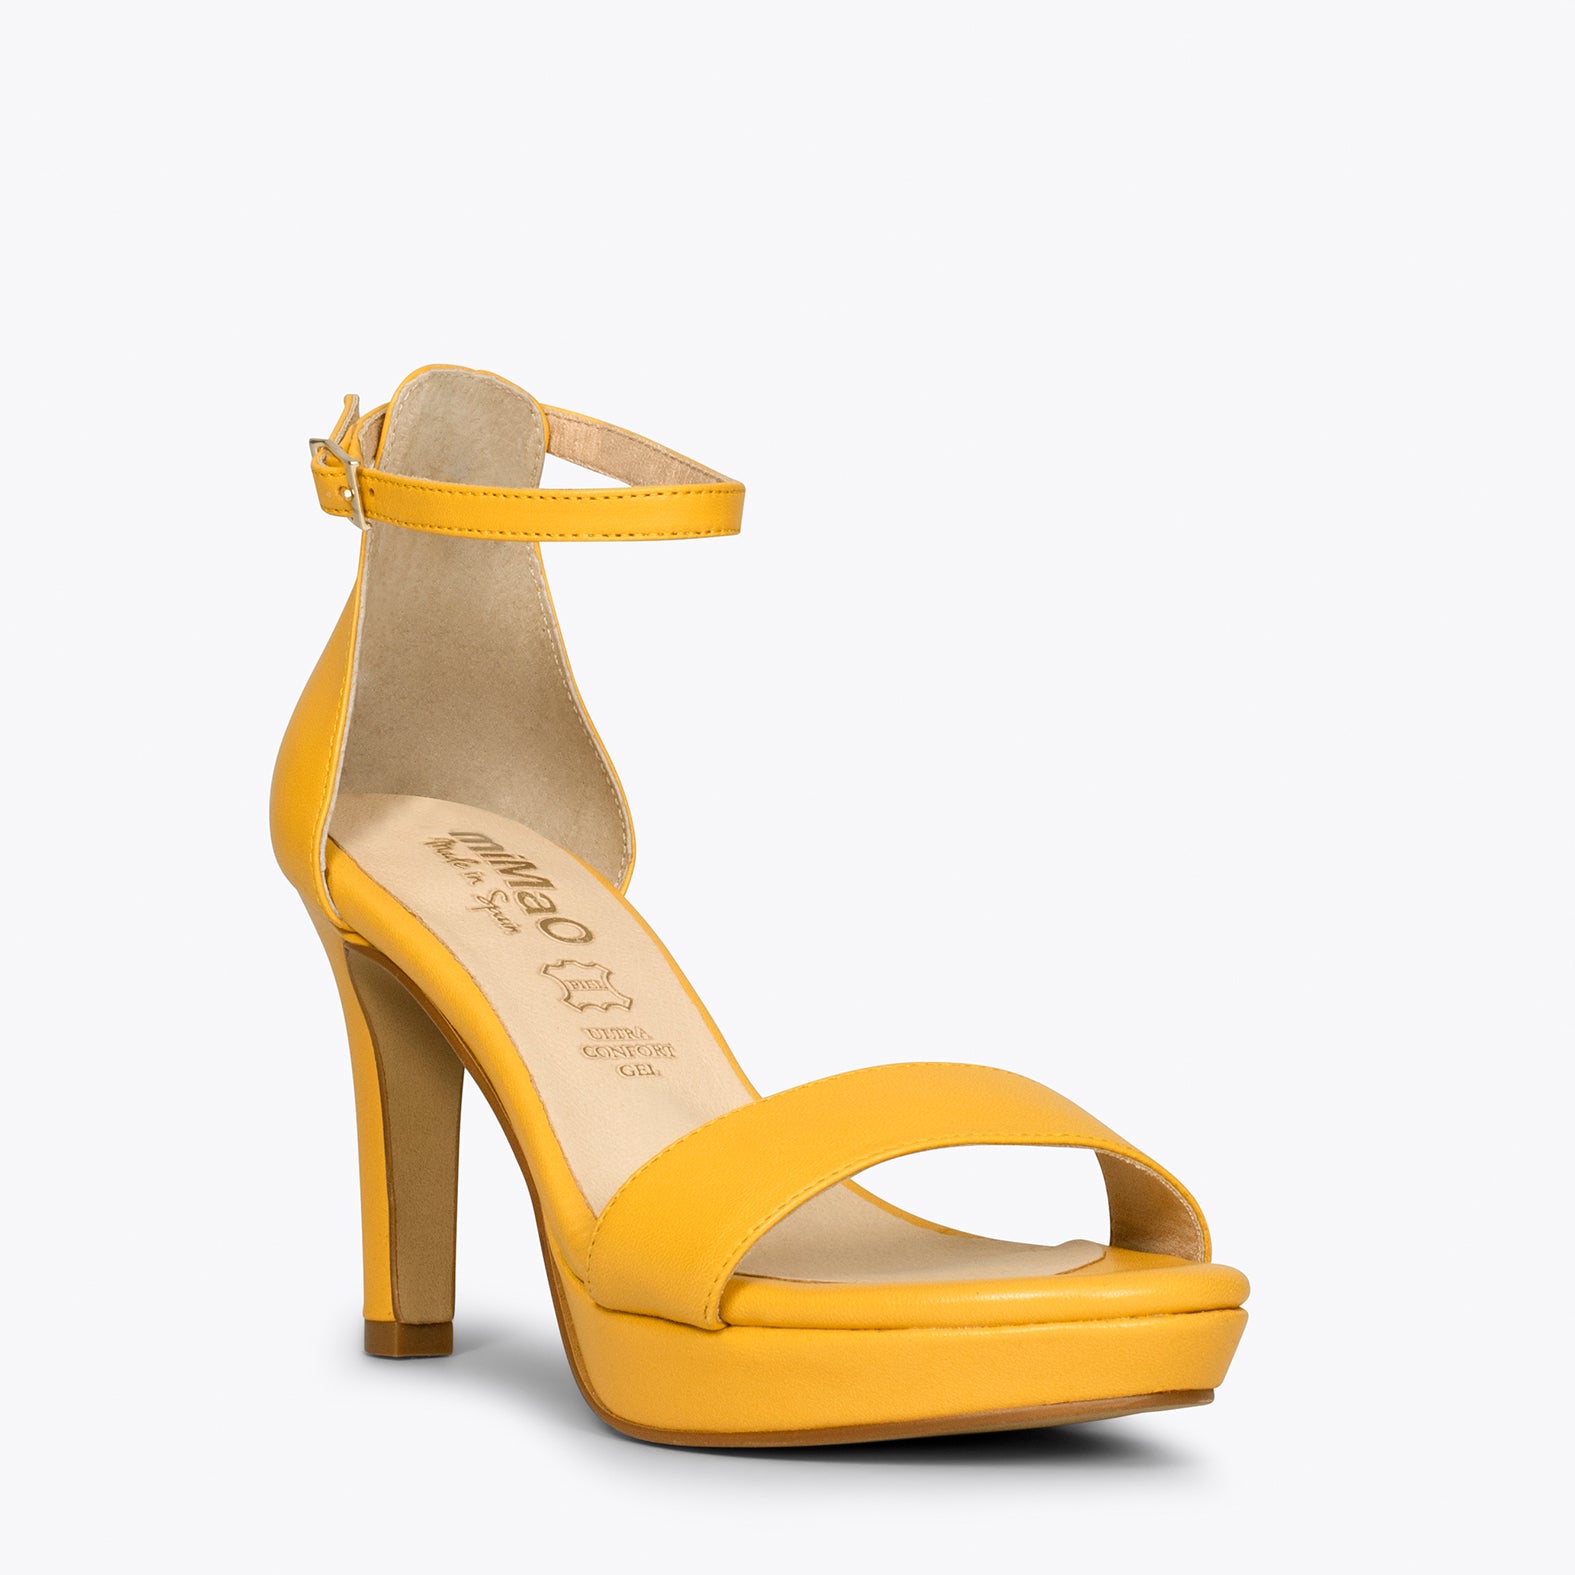 PARTY – YELLOW high heel sandals with platform